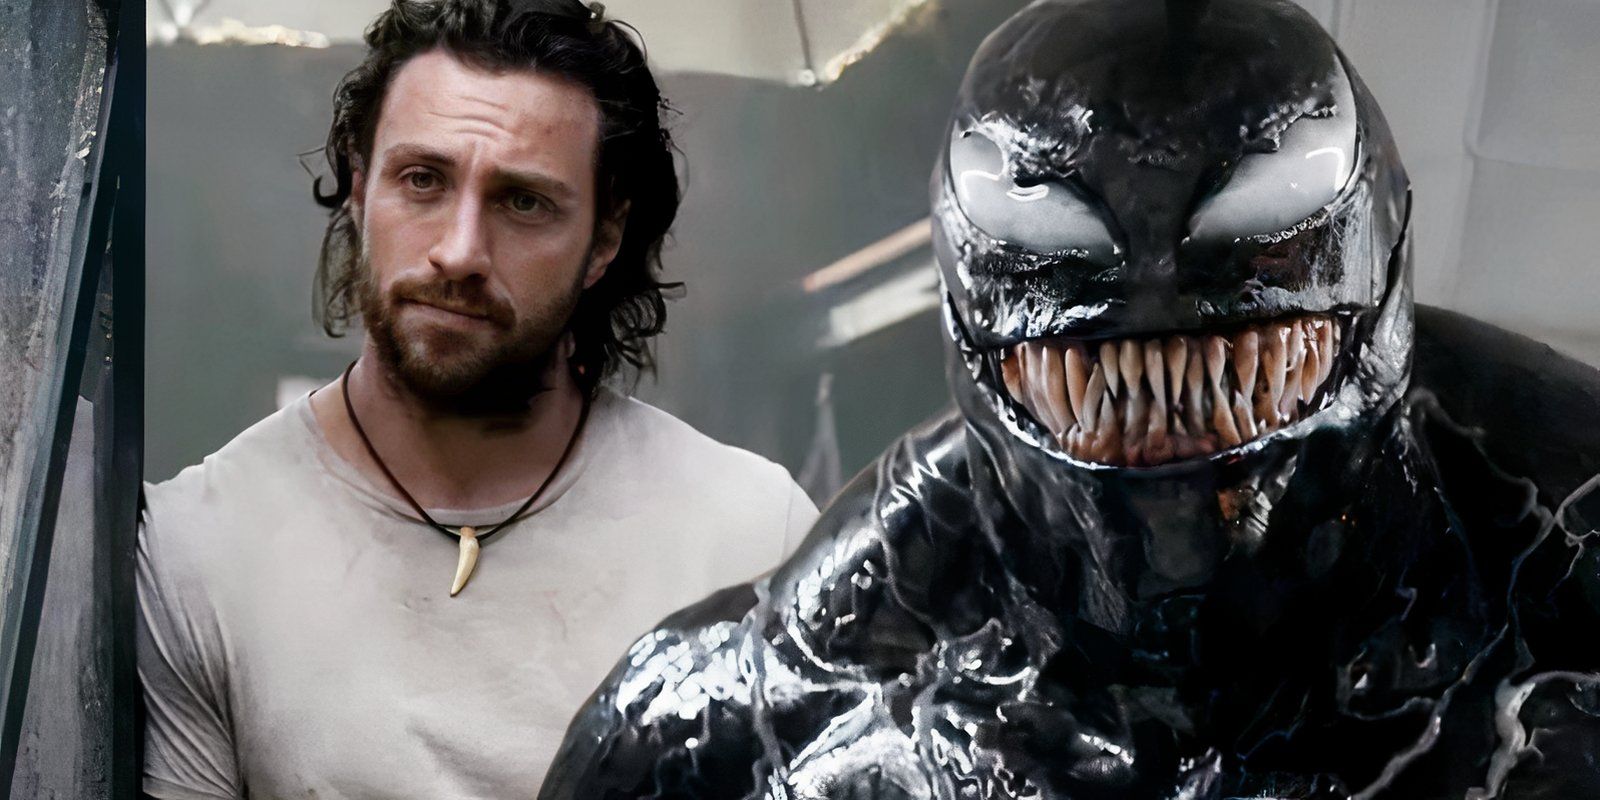 Kraven the Hunter leaning next to Venom from The Last Dance trailer